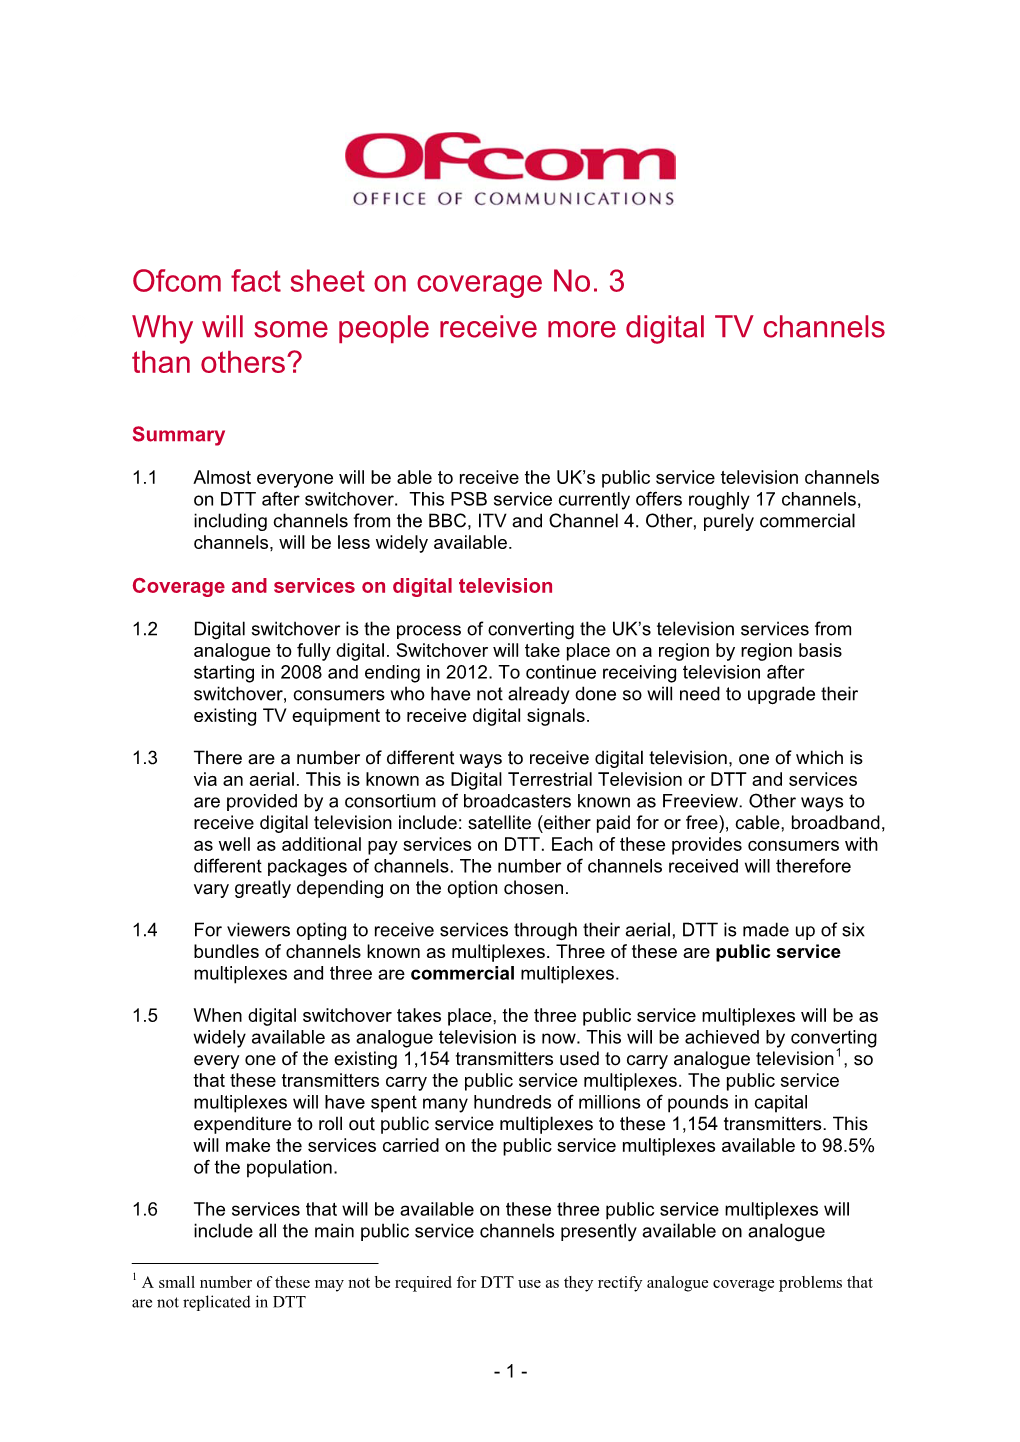 Ofcom Fact Sheet on Coverage No. 3 2 Why Will Some People Receive More Digital TV Channels Than Others?